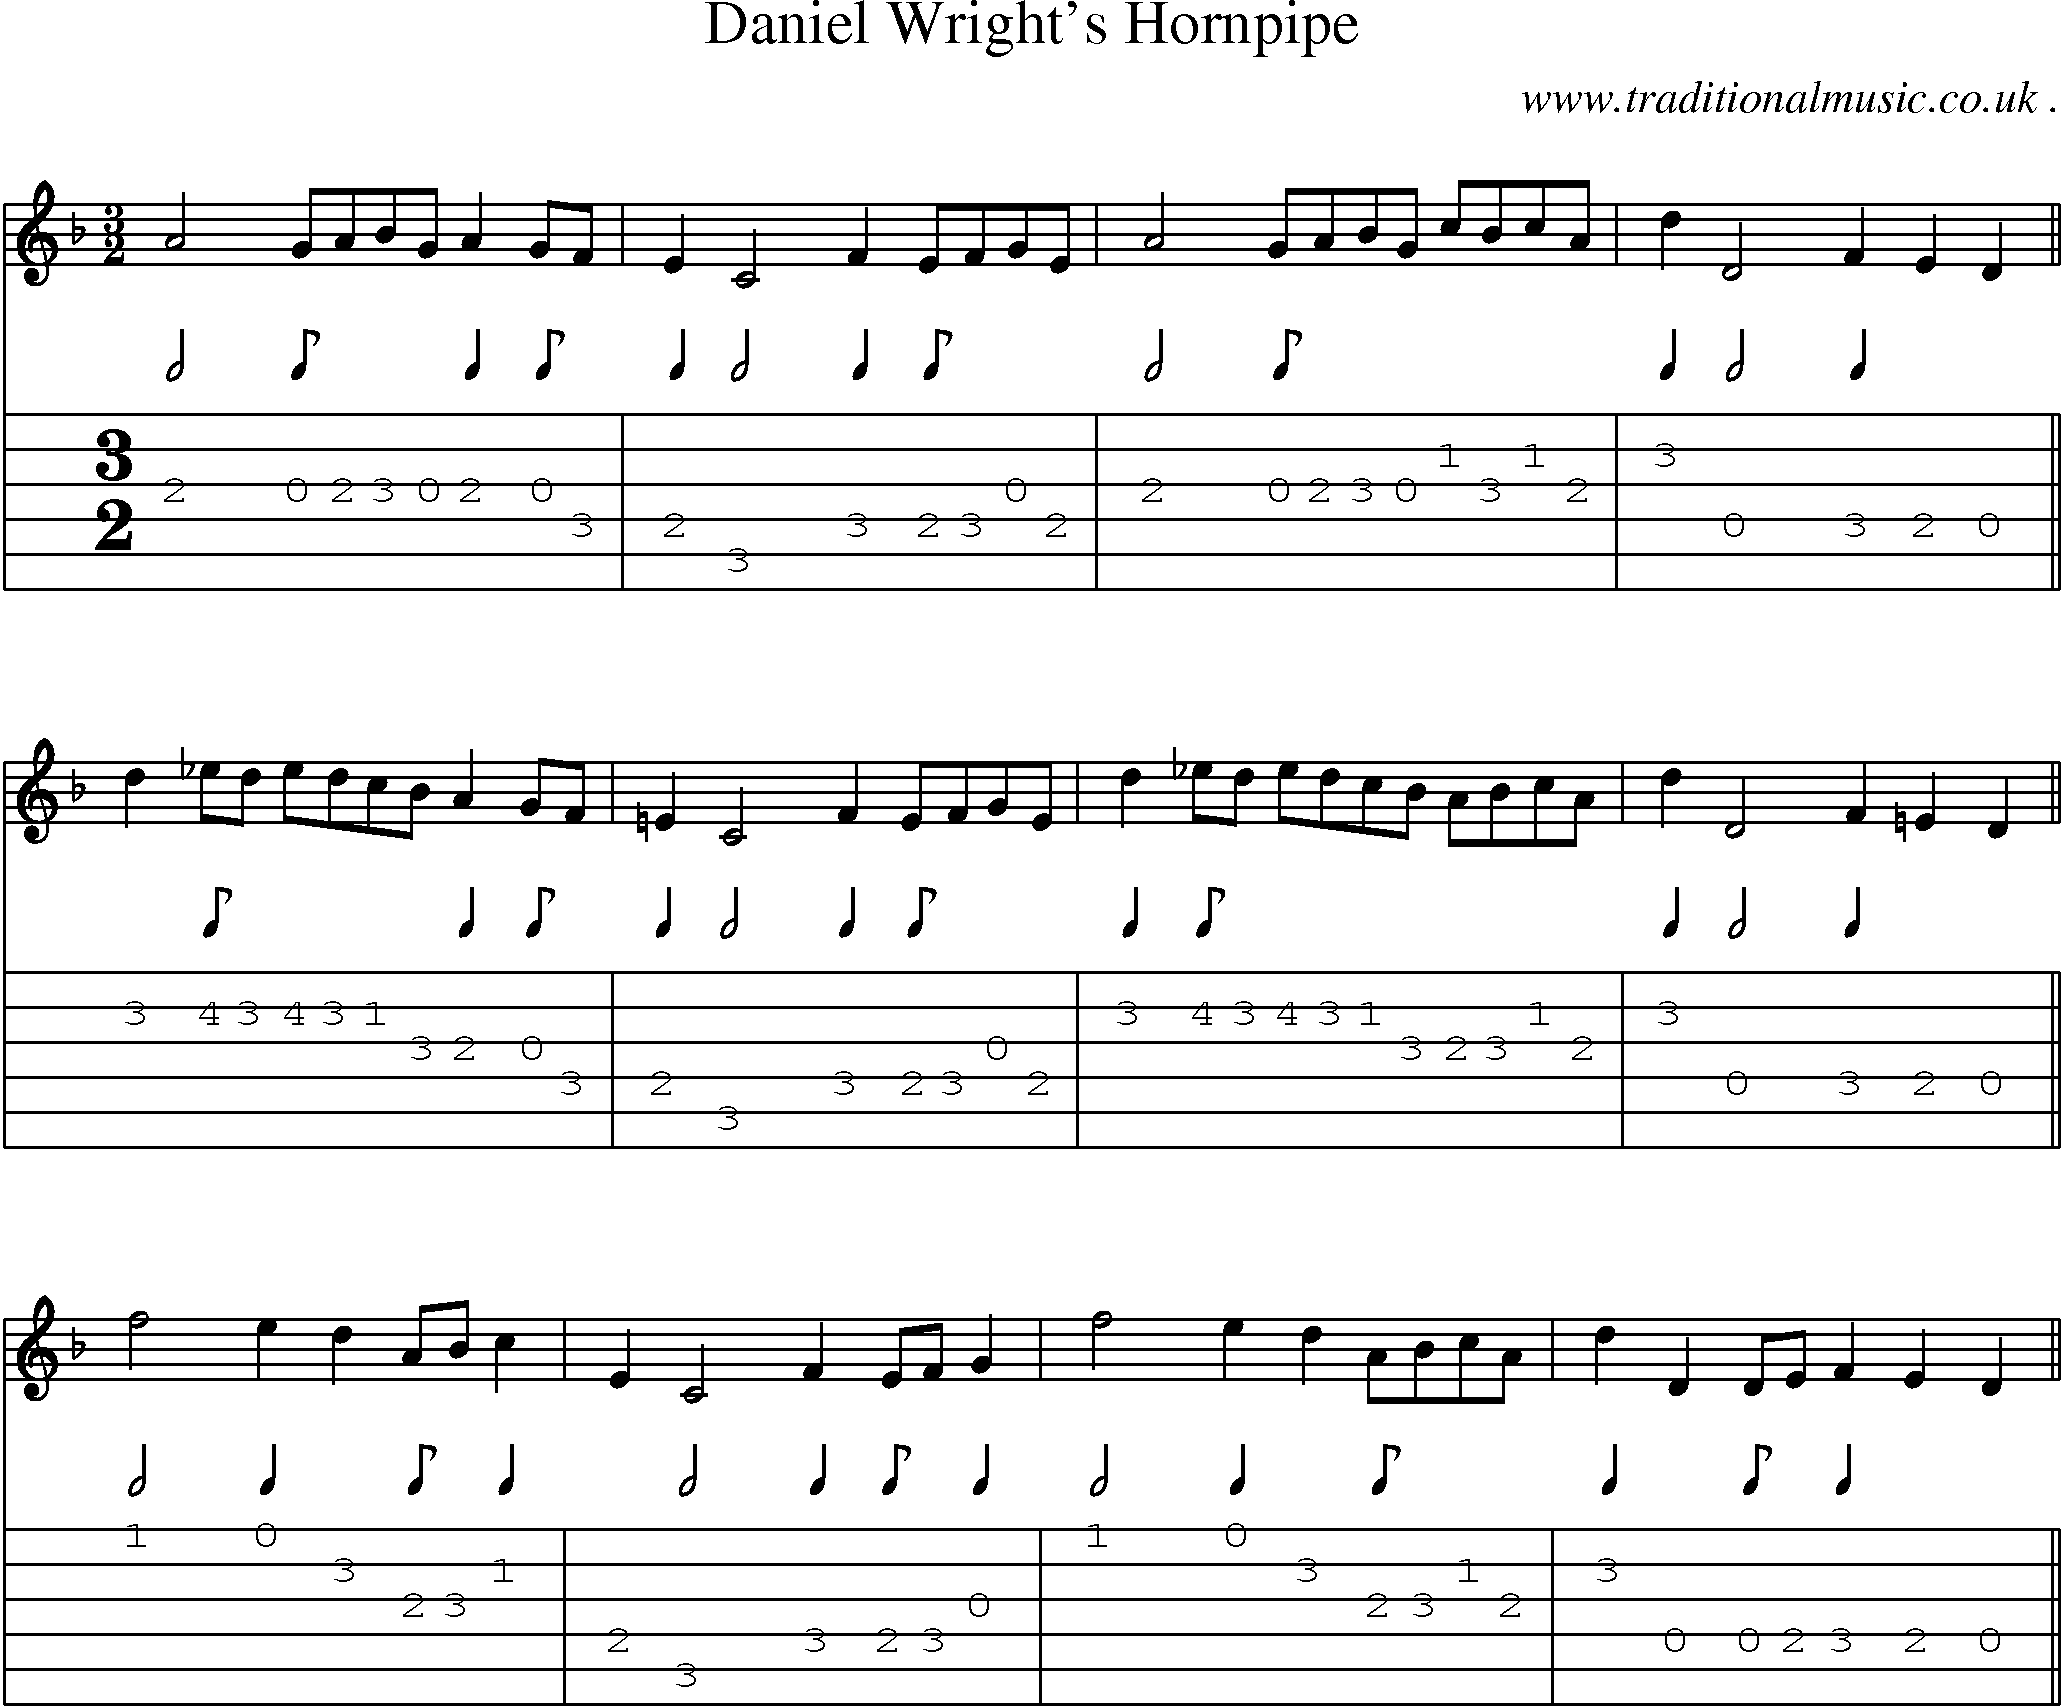 Sheet-Music and Guitar Tabs for Daniel Wrights Hornpipe